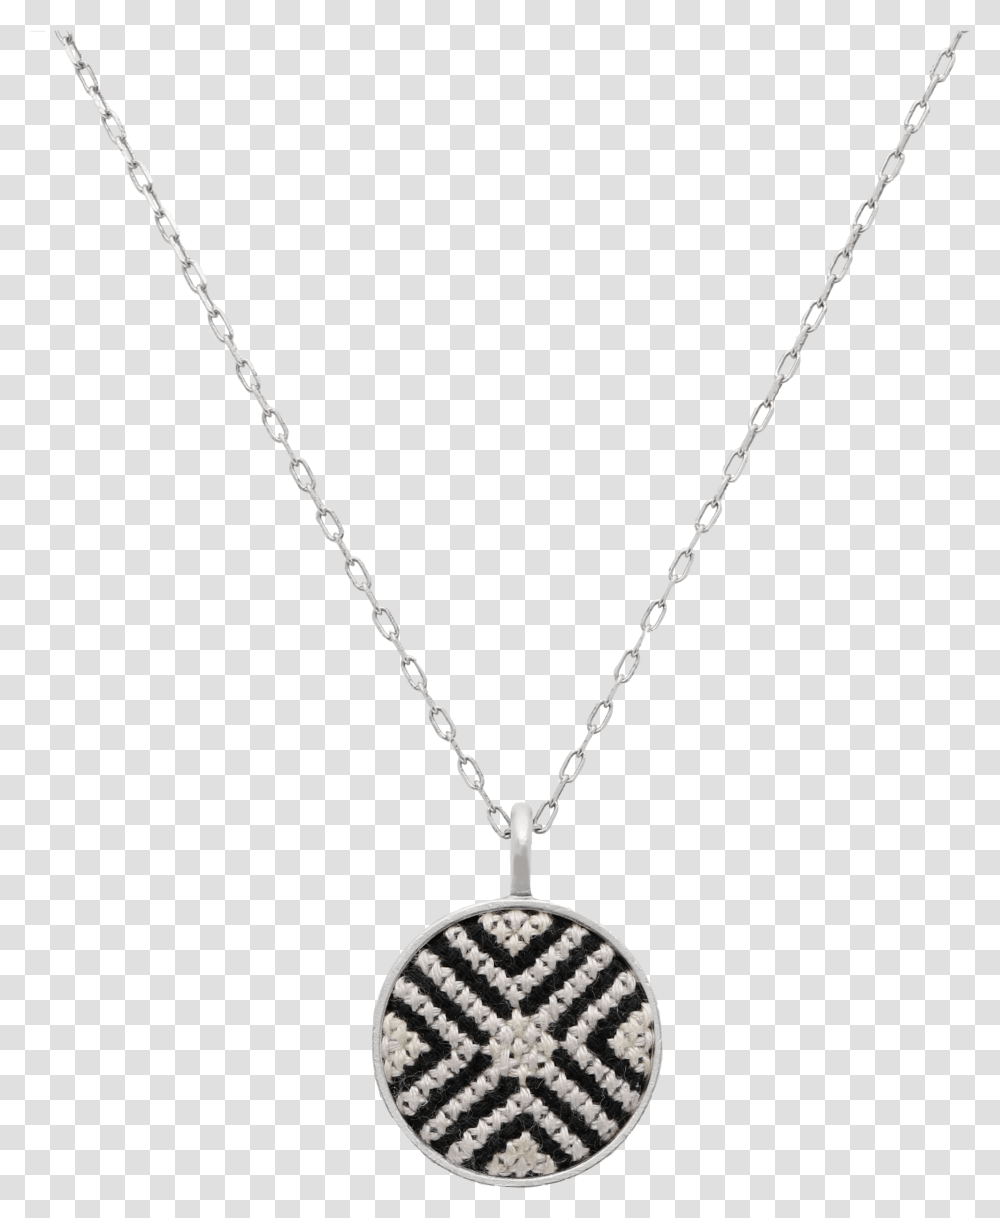 Locket, Necklace, Jewelry, Accessories, Pendant Transparent Png